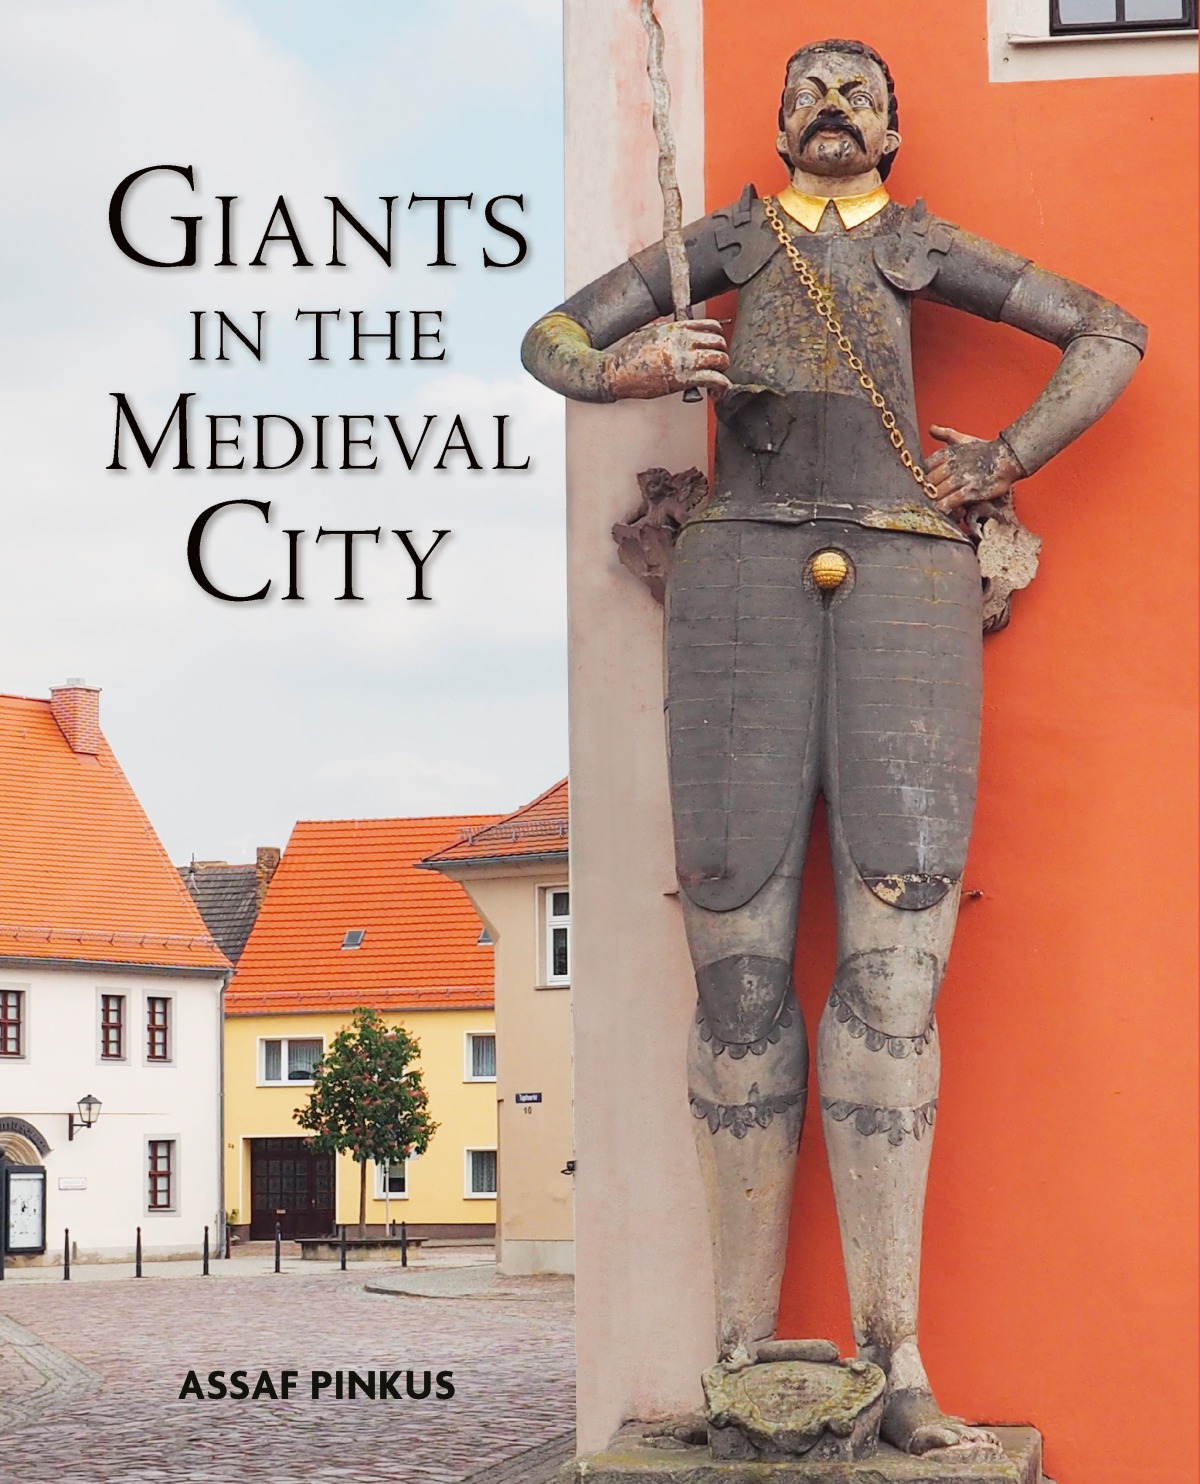 New publication: ‘Giants in the Medieval City’, by Assaf Pinkus